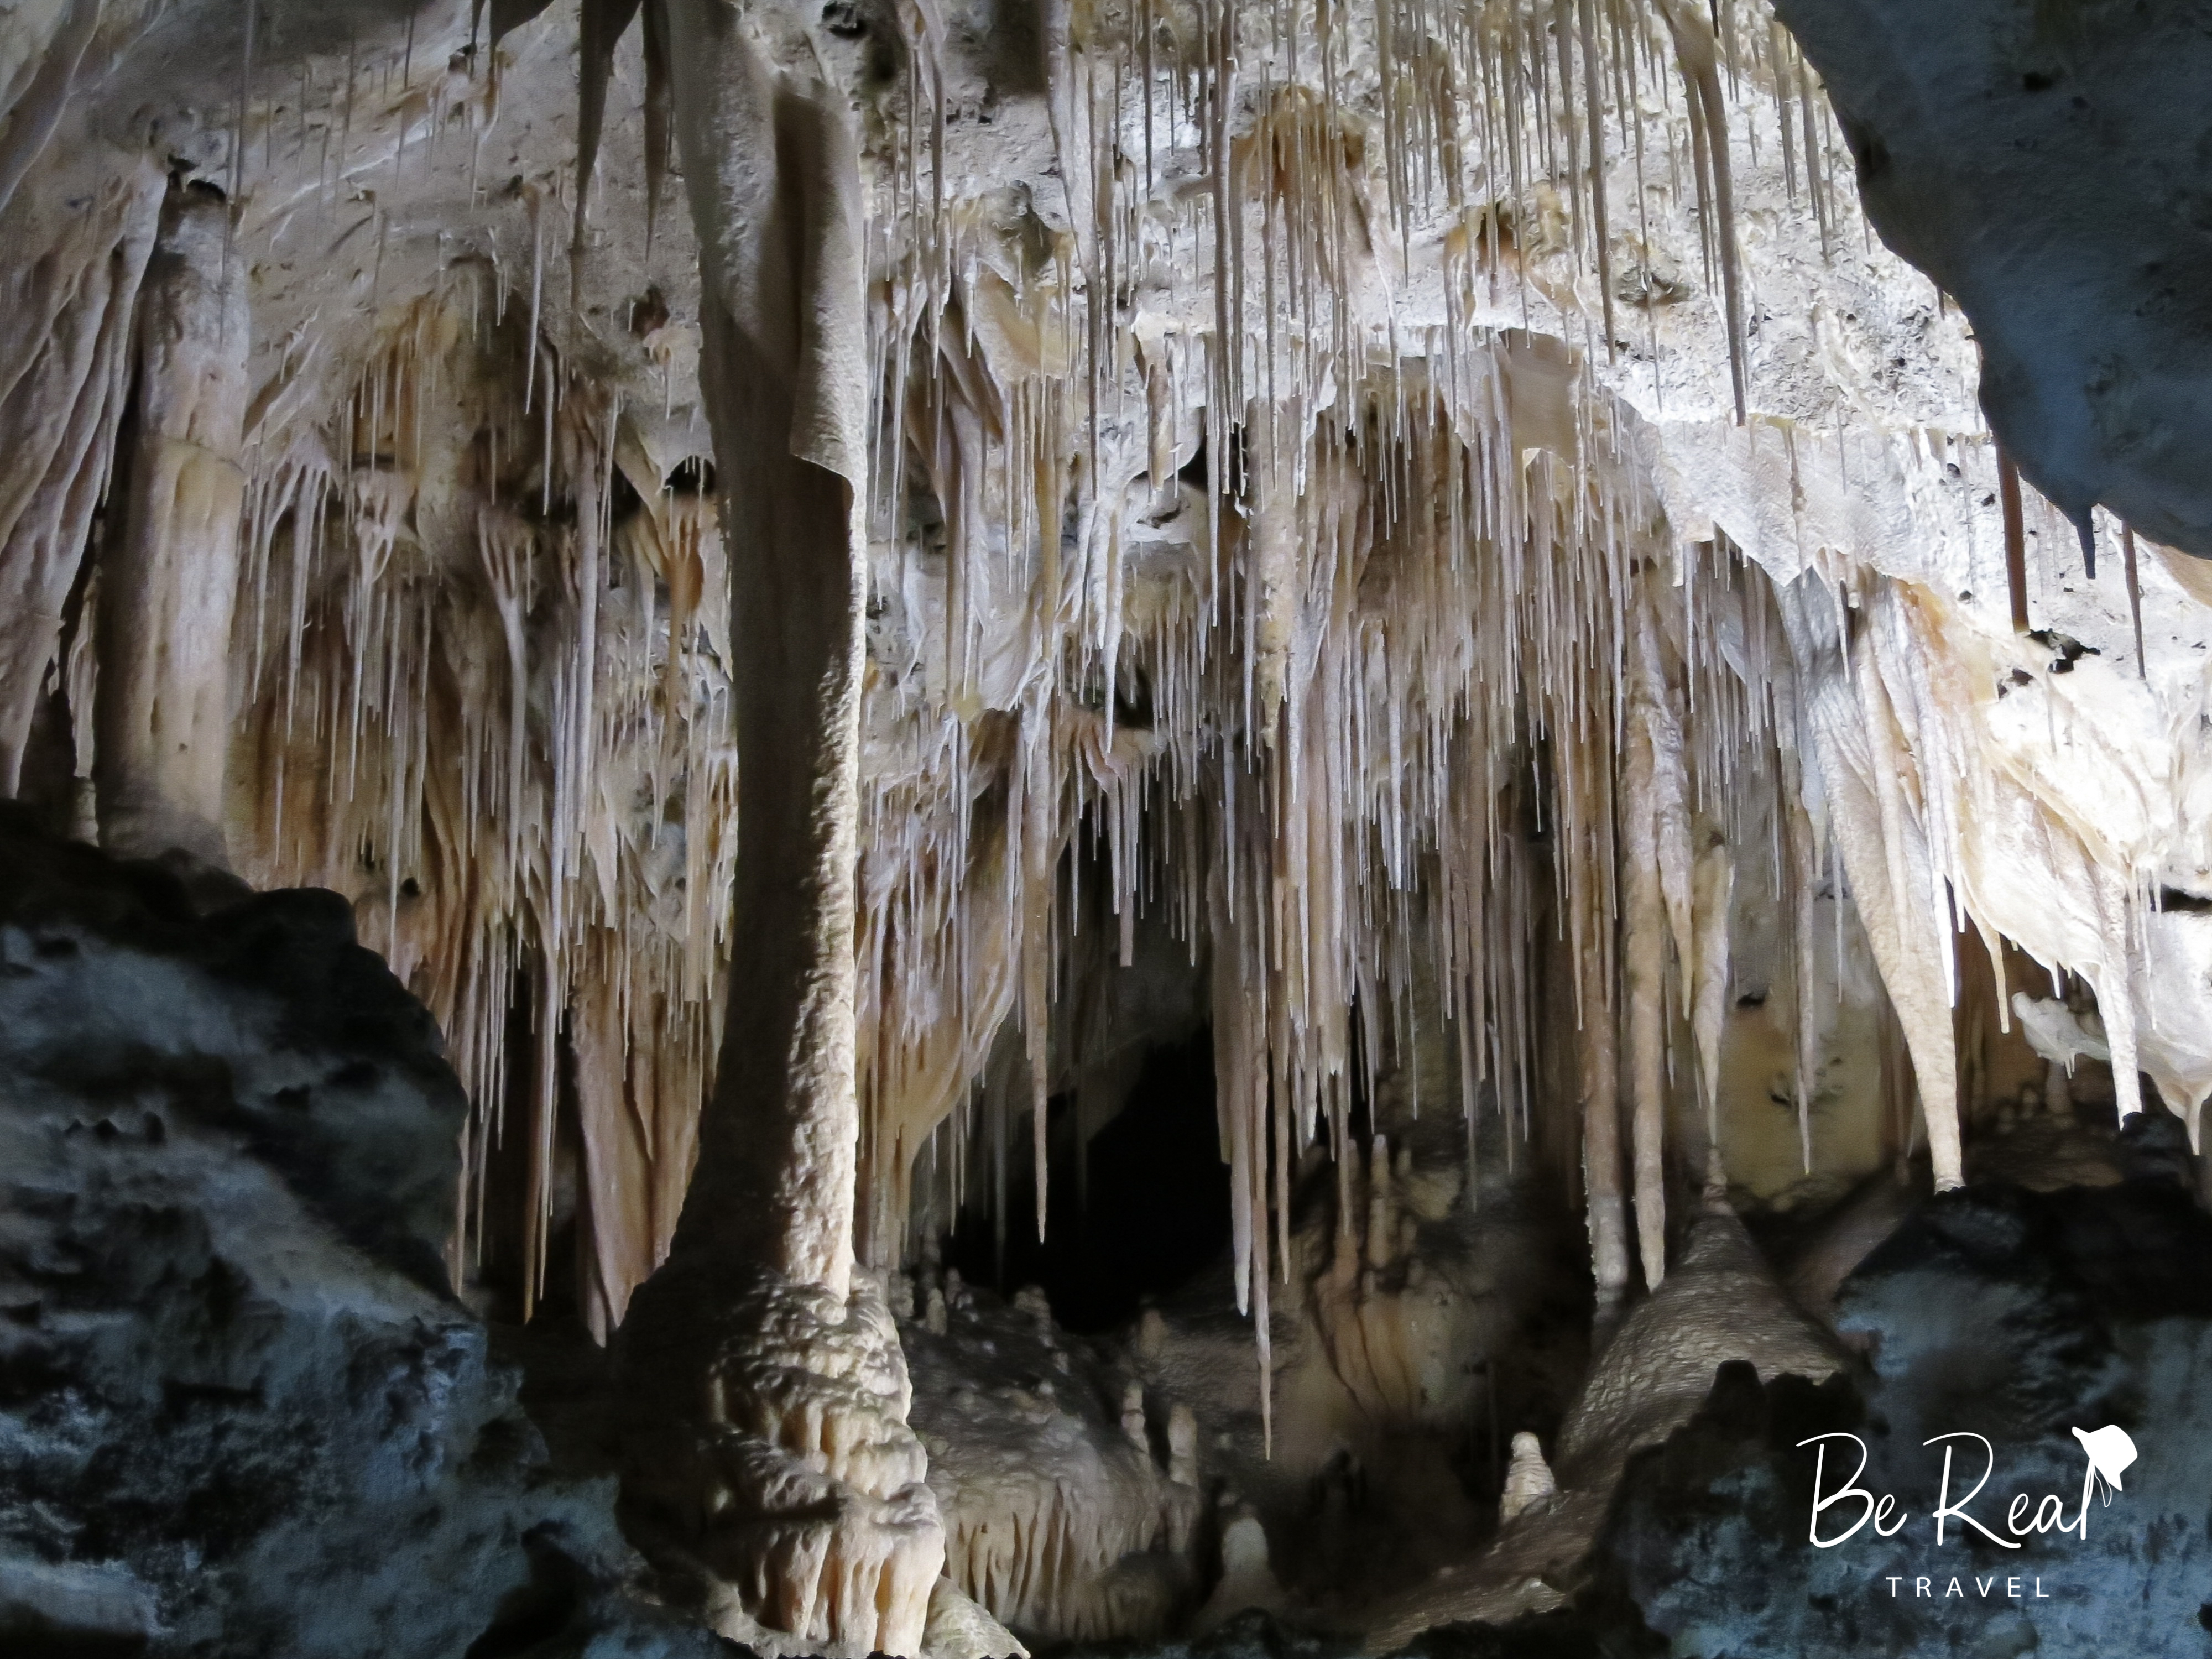 Mineral formations bursting from a cave ceiling make Carlsbad Caverns, New Mexico look like an alien world